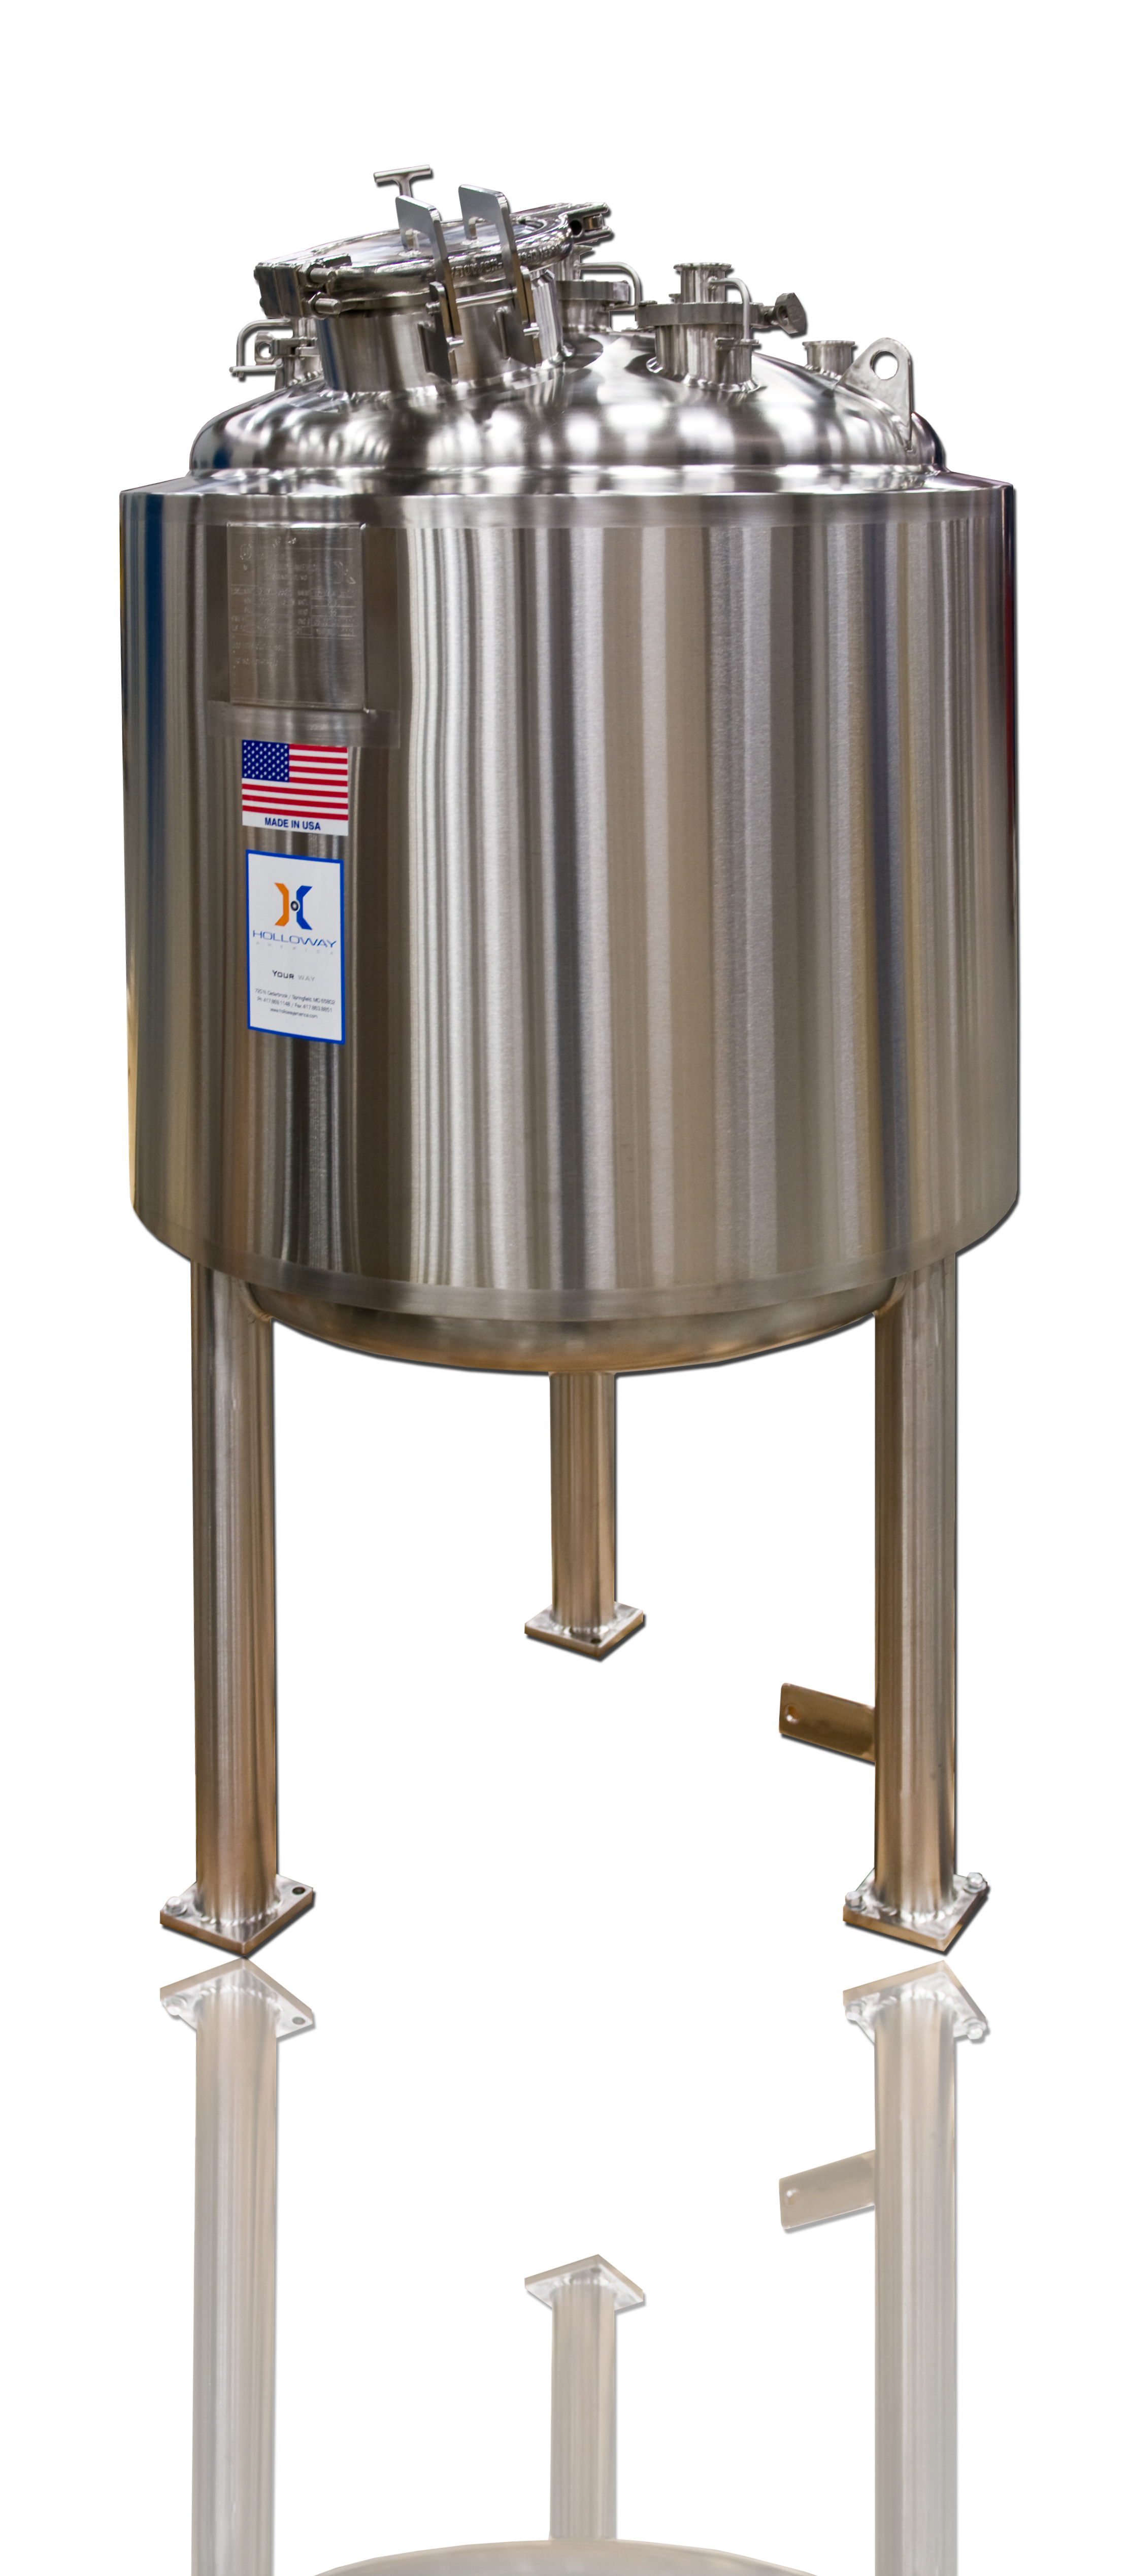 Sprayball coverage makes clean in place or CIP vessels like this one completely sanitary.